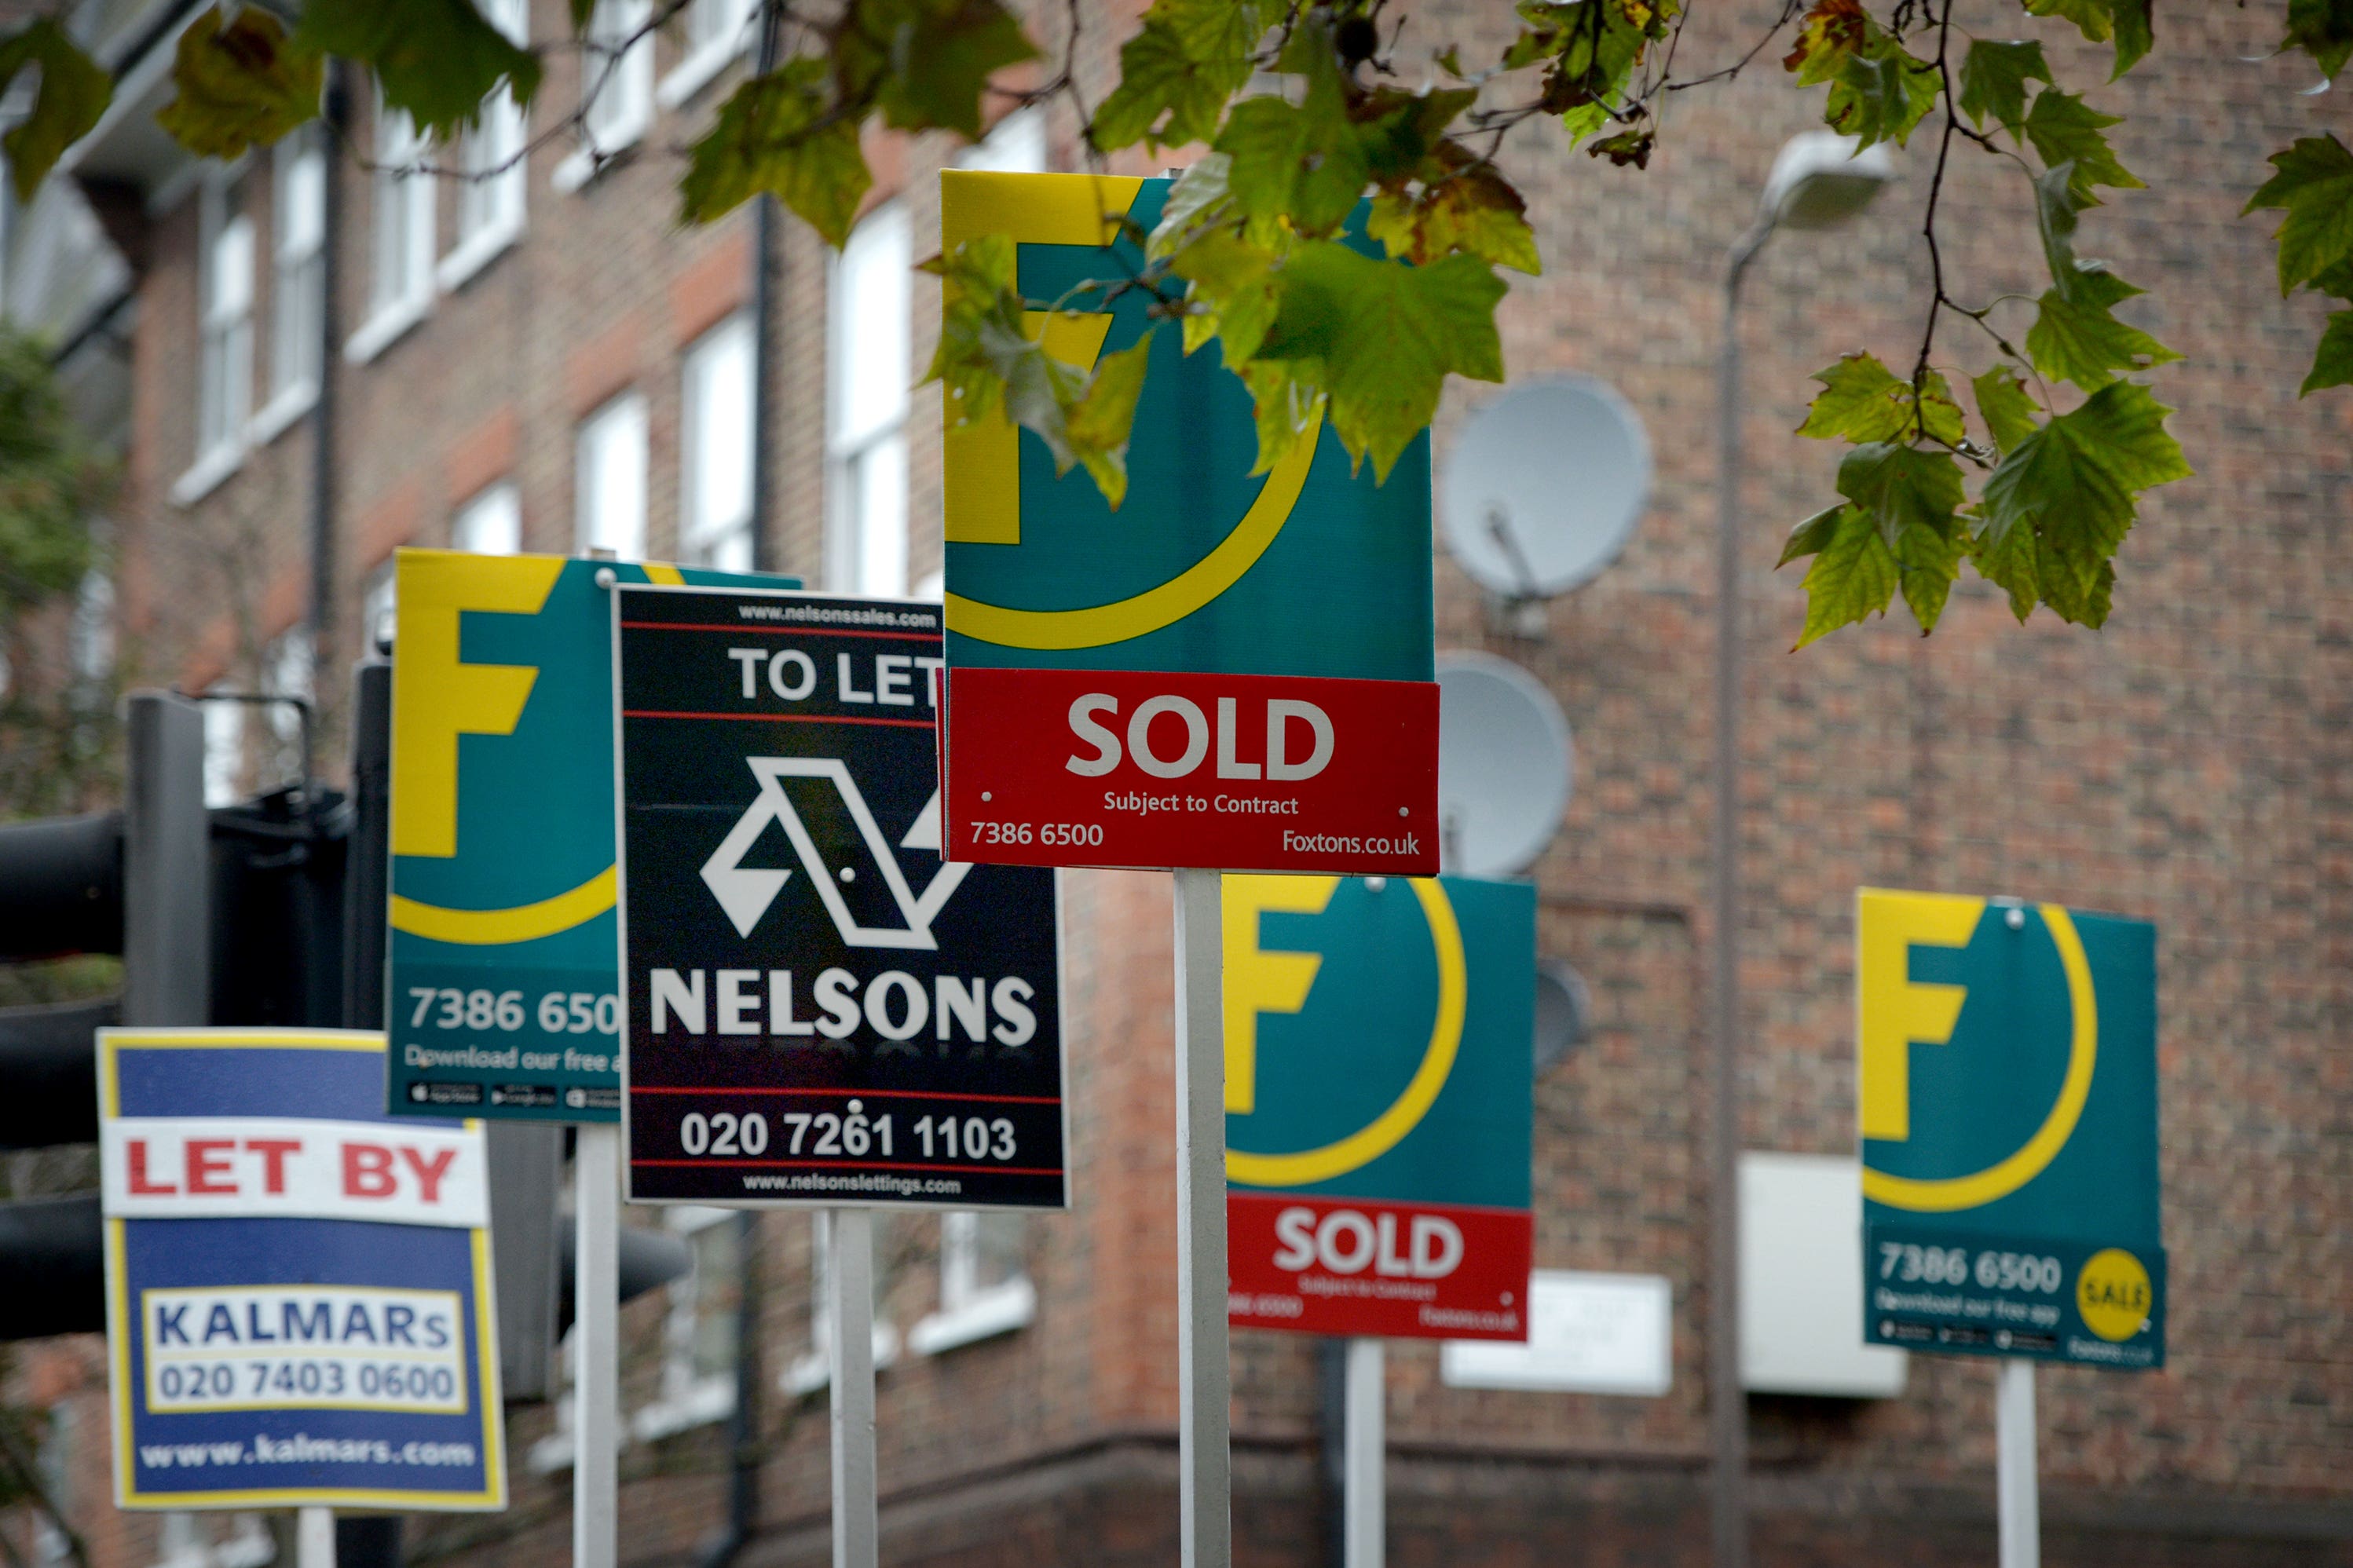 Prices are down by £8,000 overall since August peak, Halifax says